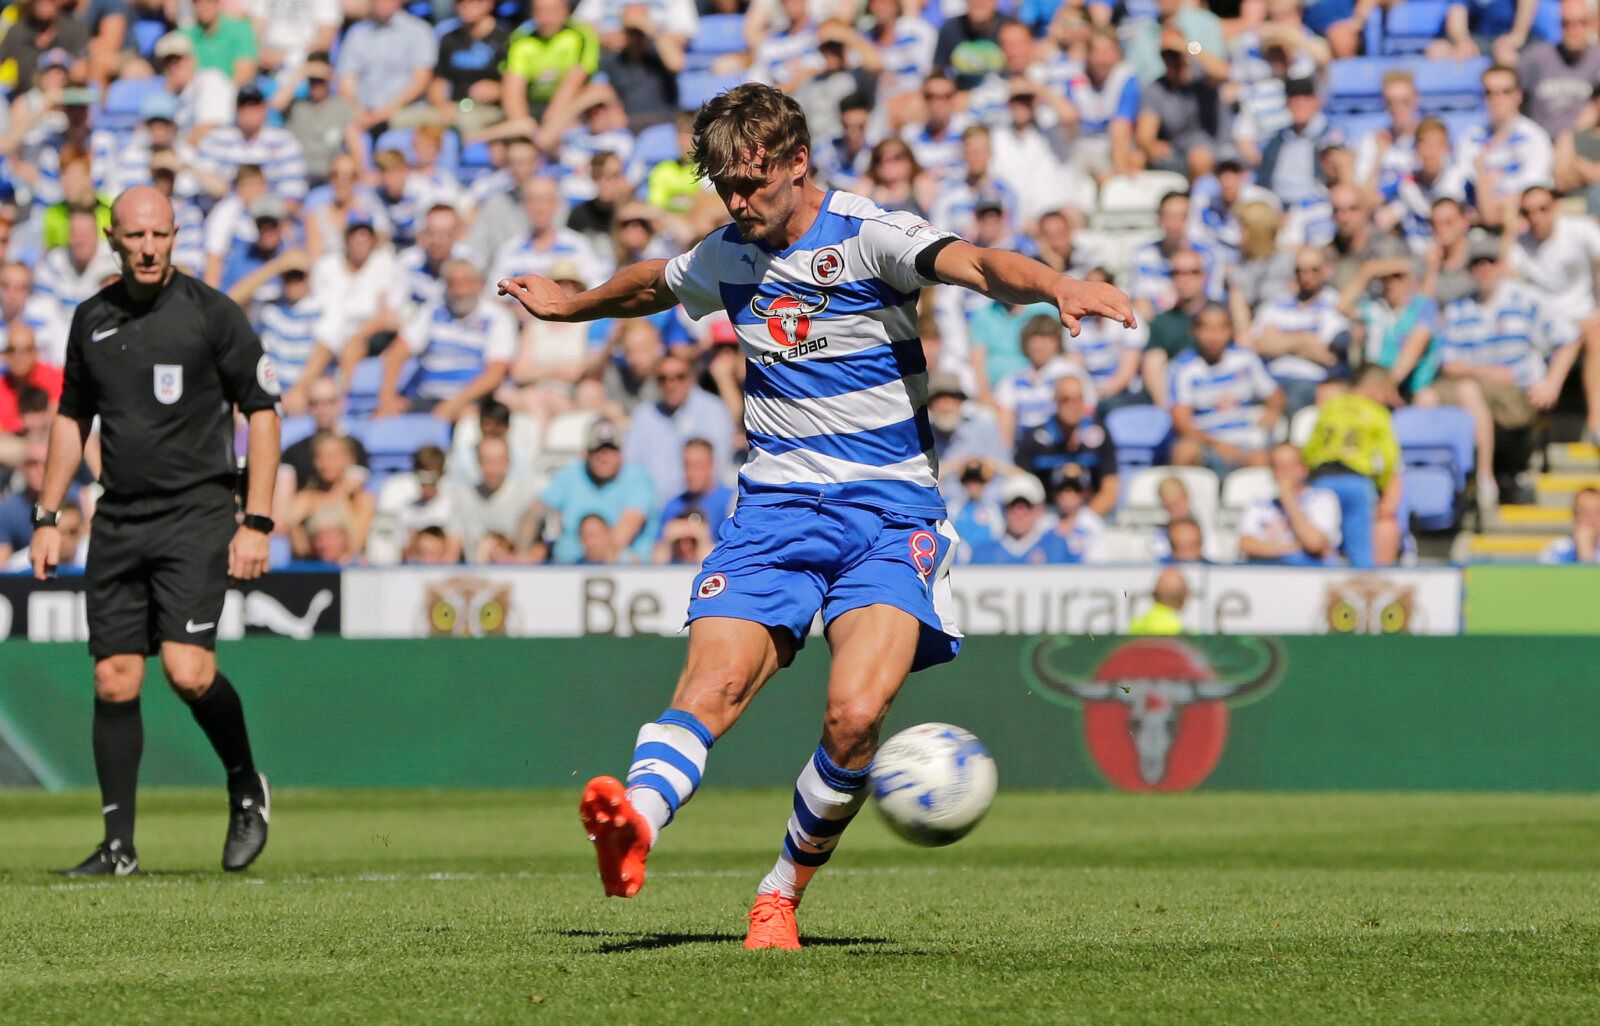 Football Soccer Britain - Reading v Preston North End - Sky Bet Championship - The Madejski Stadium - 6/8/16 
John Swift of Reading scores their first goal  
Mandatory Credit: Action Images / Henry Browne 
Livepic 
EDITORIAL USE ONLY.